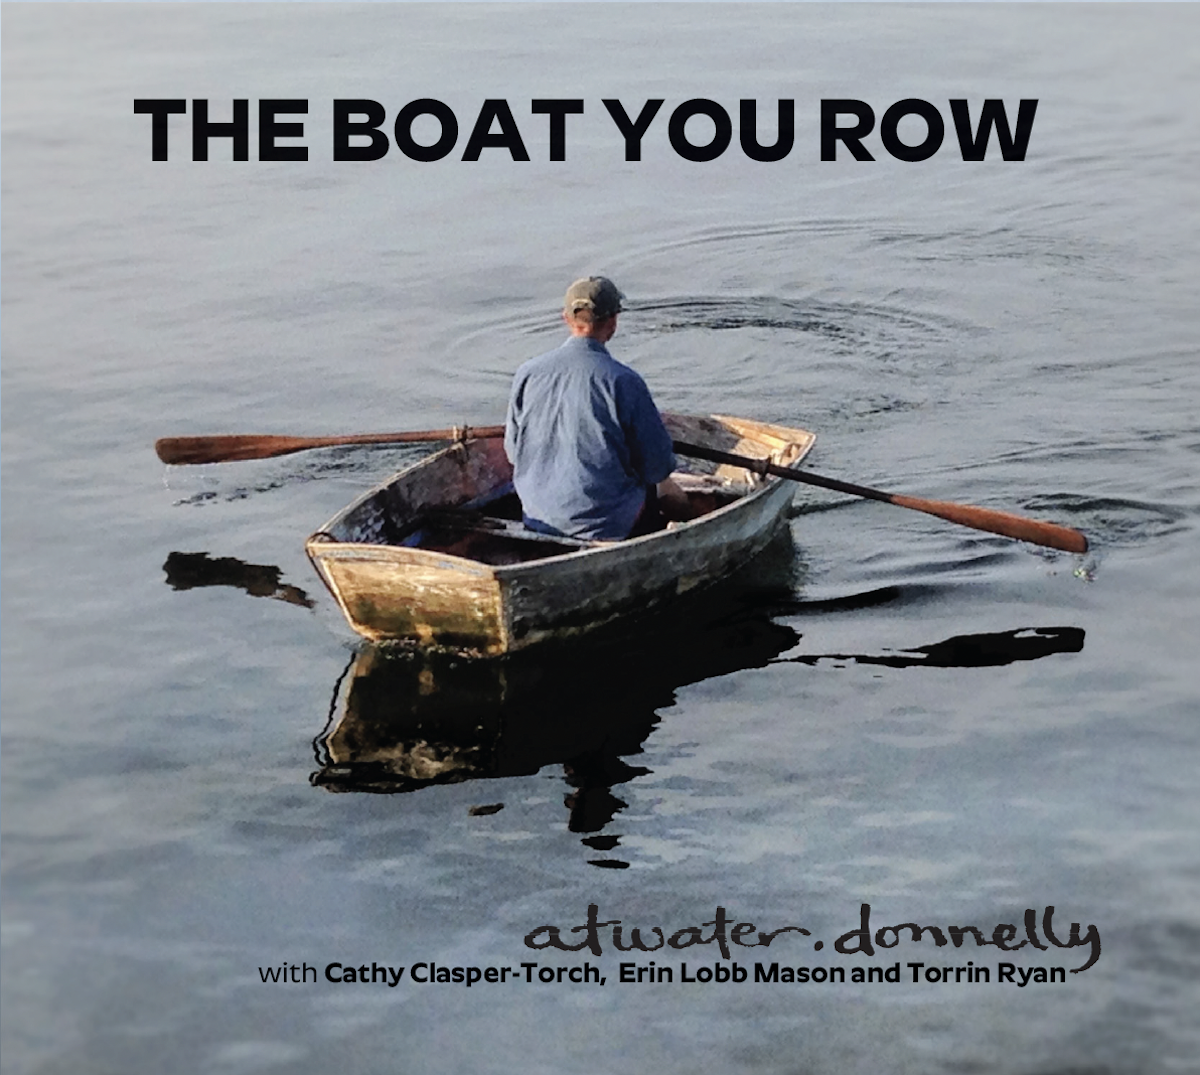 The Boat you Row